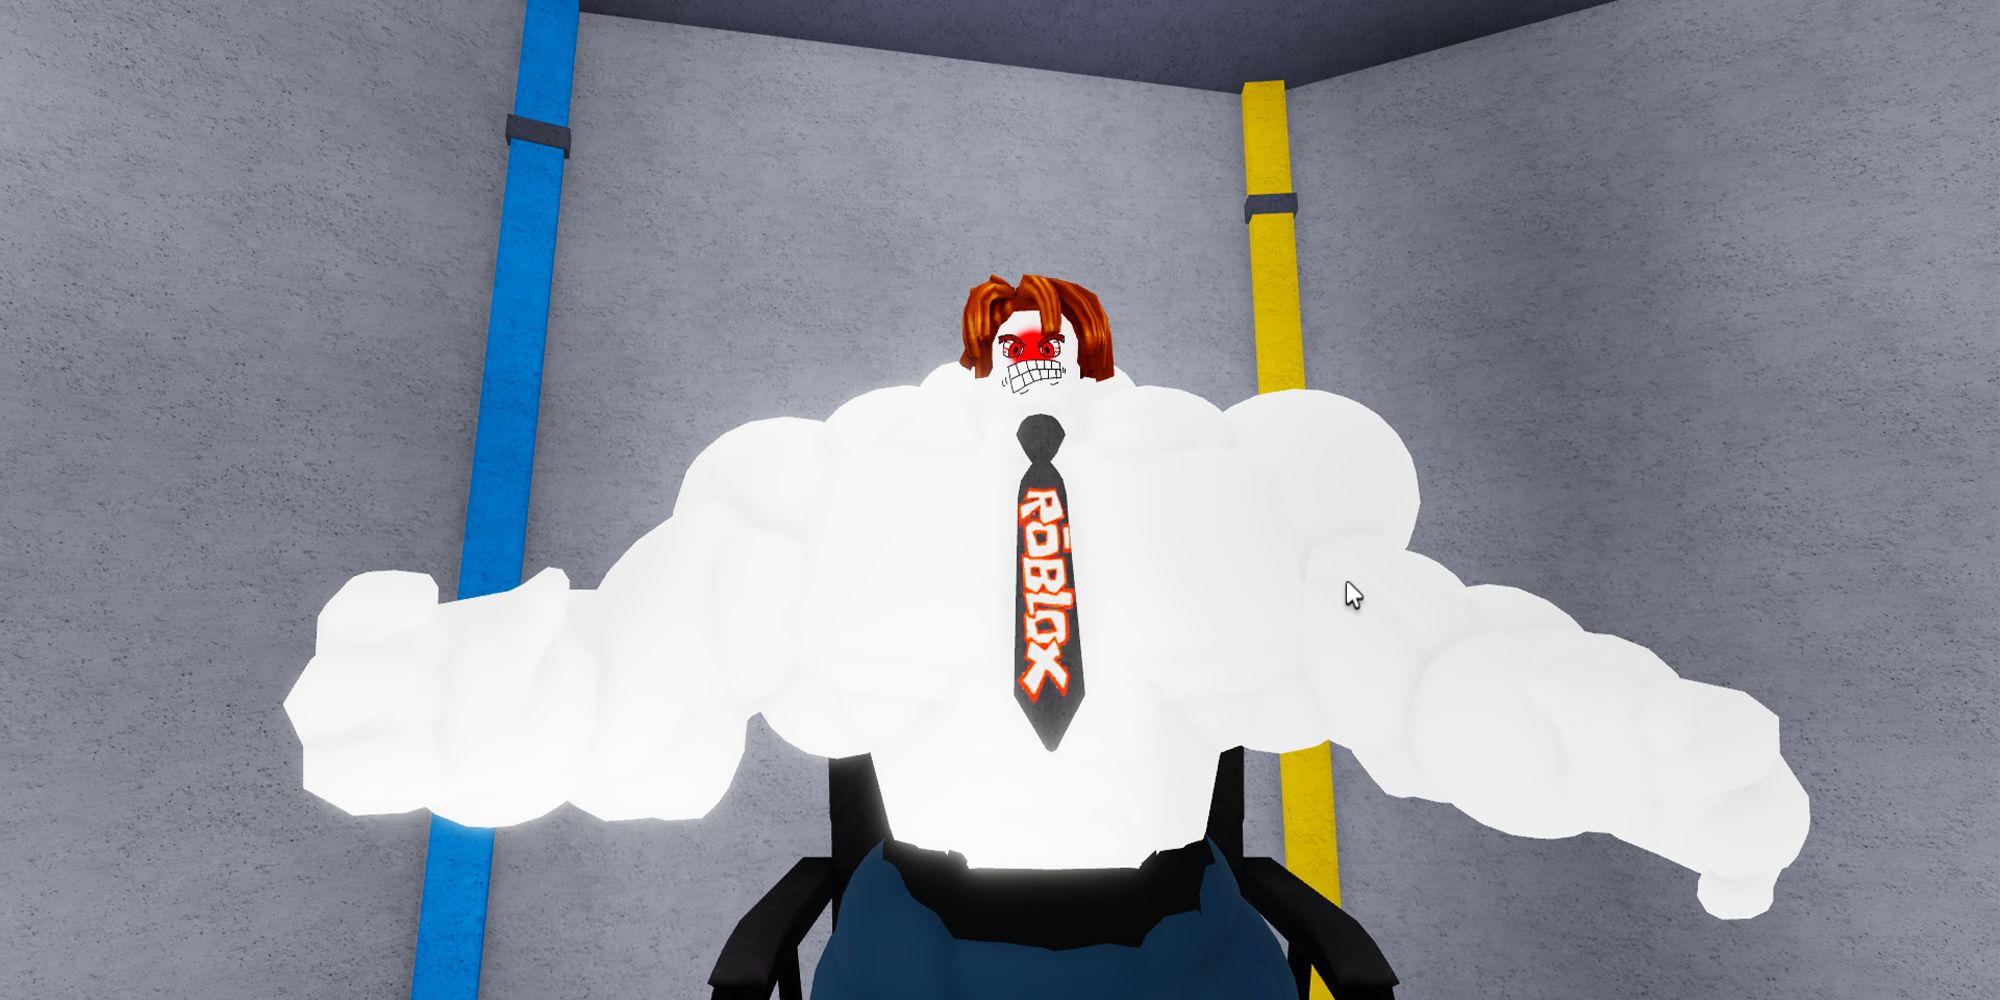 Mega Bacon rages out at his desk after seeing one of his minions get defeated in the Roblox game Mega Noob Simulator.